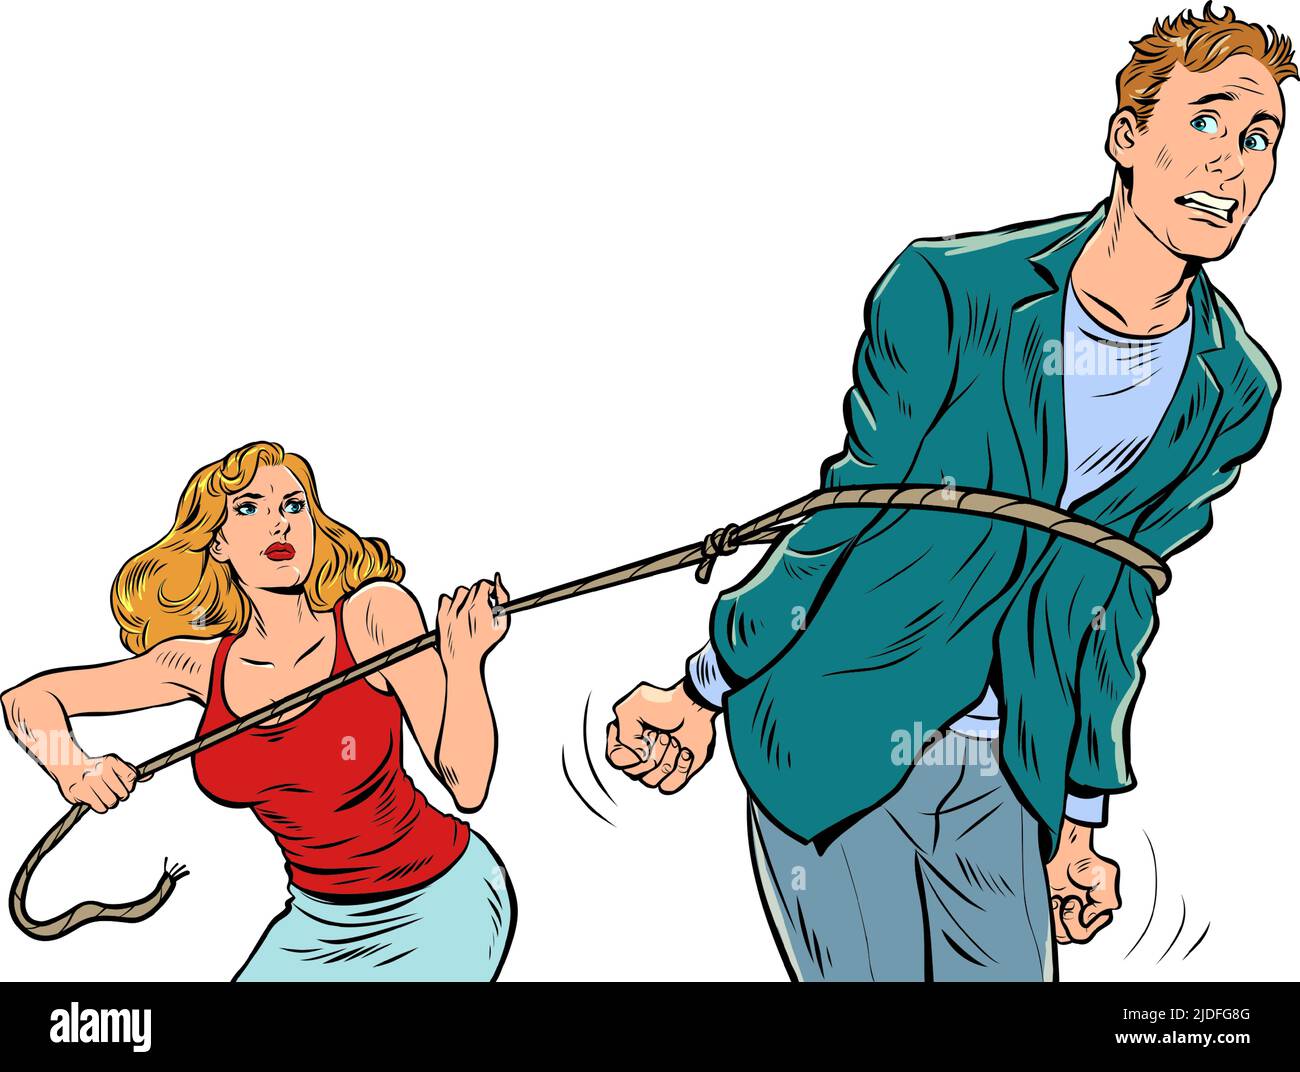 the woman lassoed the man, the girl threw a noose on the man and took him prisoner. Pop Art Retro Vector Illustration Kitsch Vintage 50s 60s Style Stock Vector